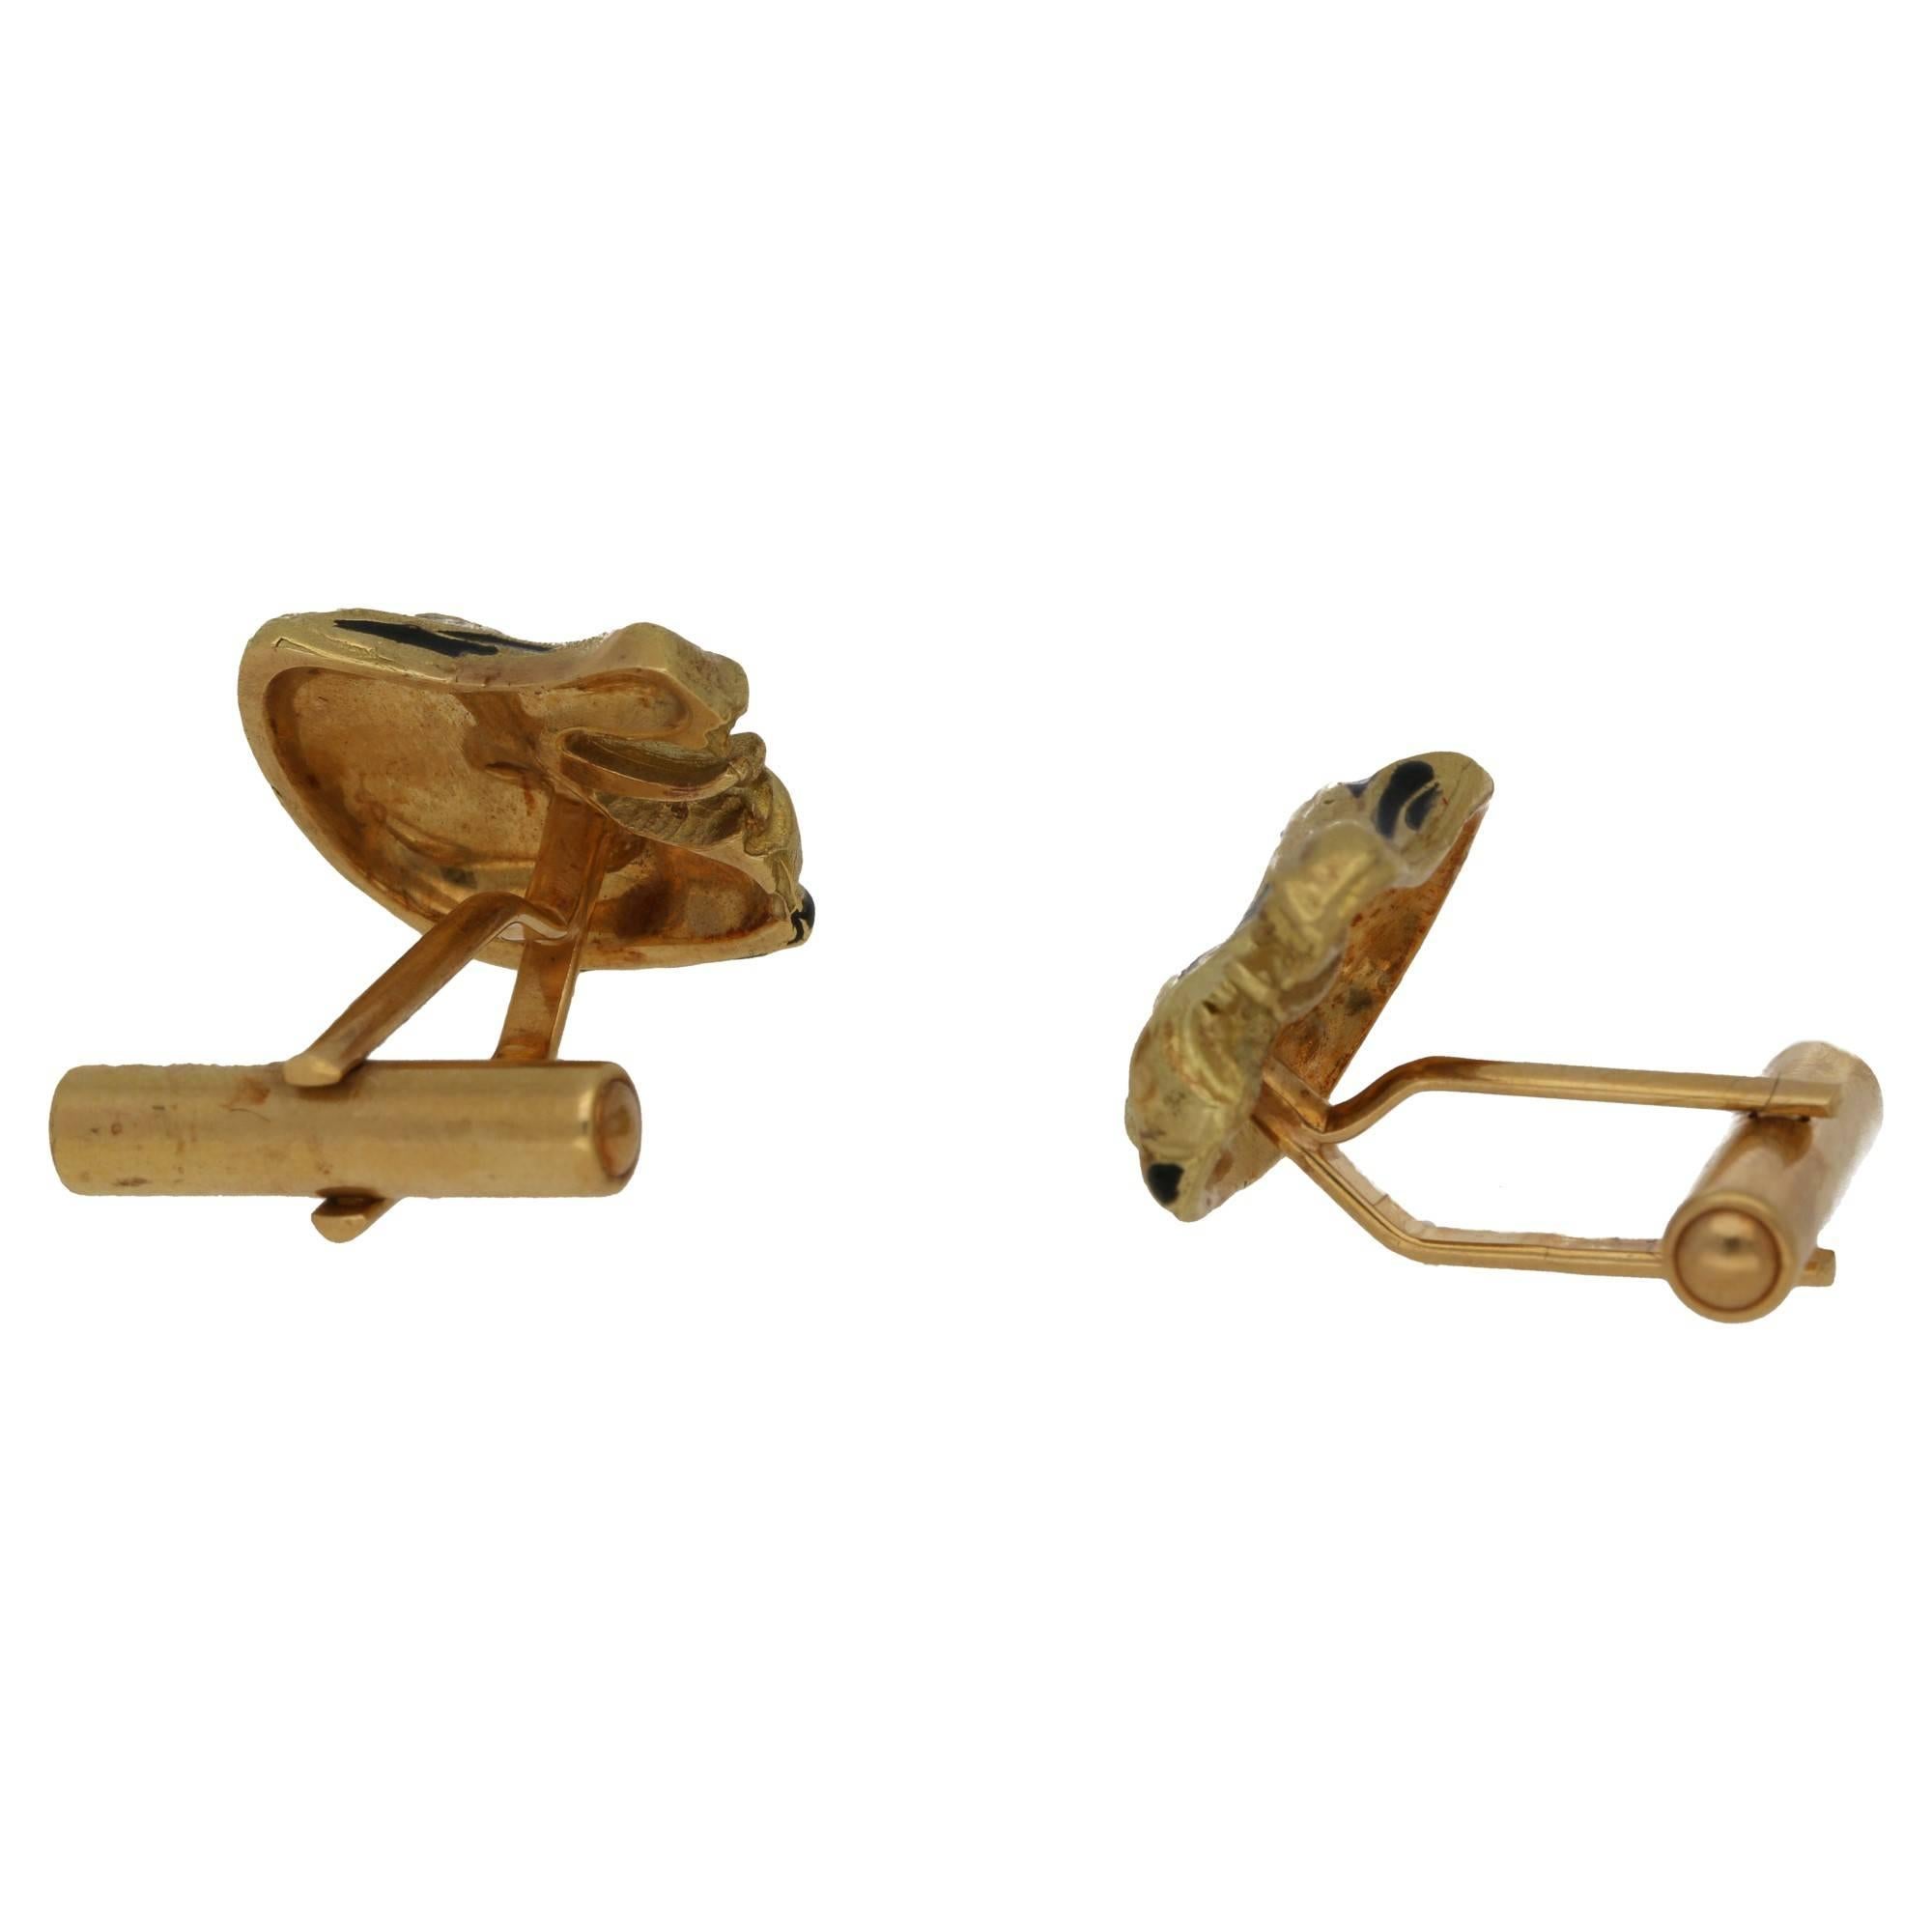 A smart pair of vintage tiger head cufflinks, circa 1980. These are in great condition, they are hallmarked with the owl bearing a '75' across it's chest. This indicates that they are French in origin, specifically Paris. The black striped detailing